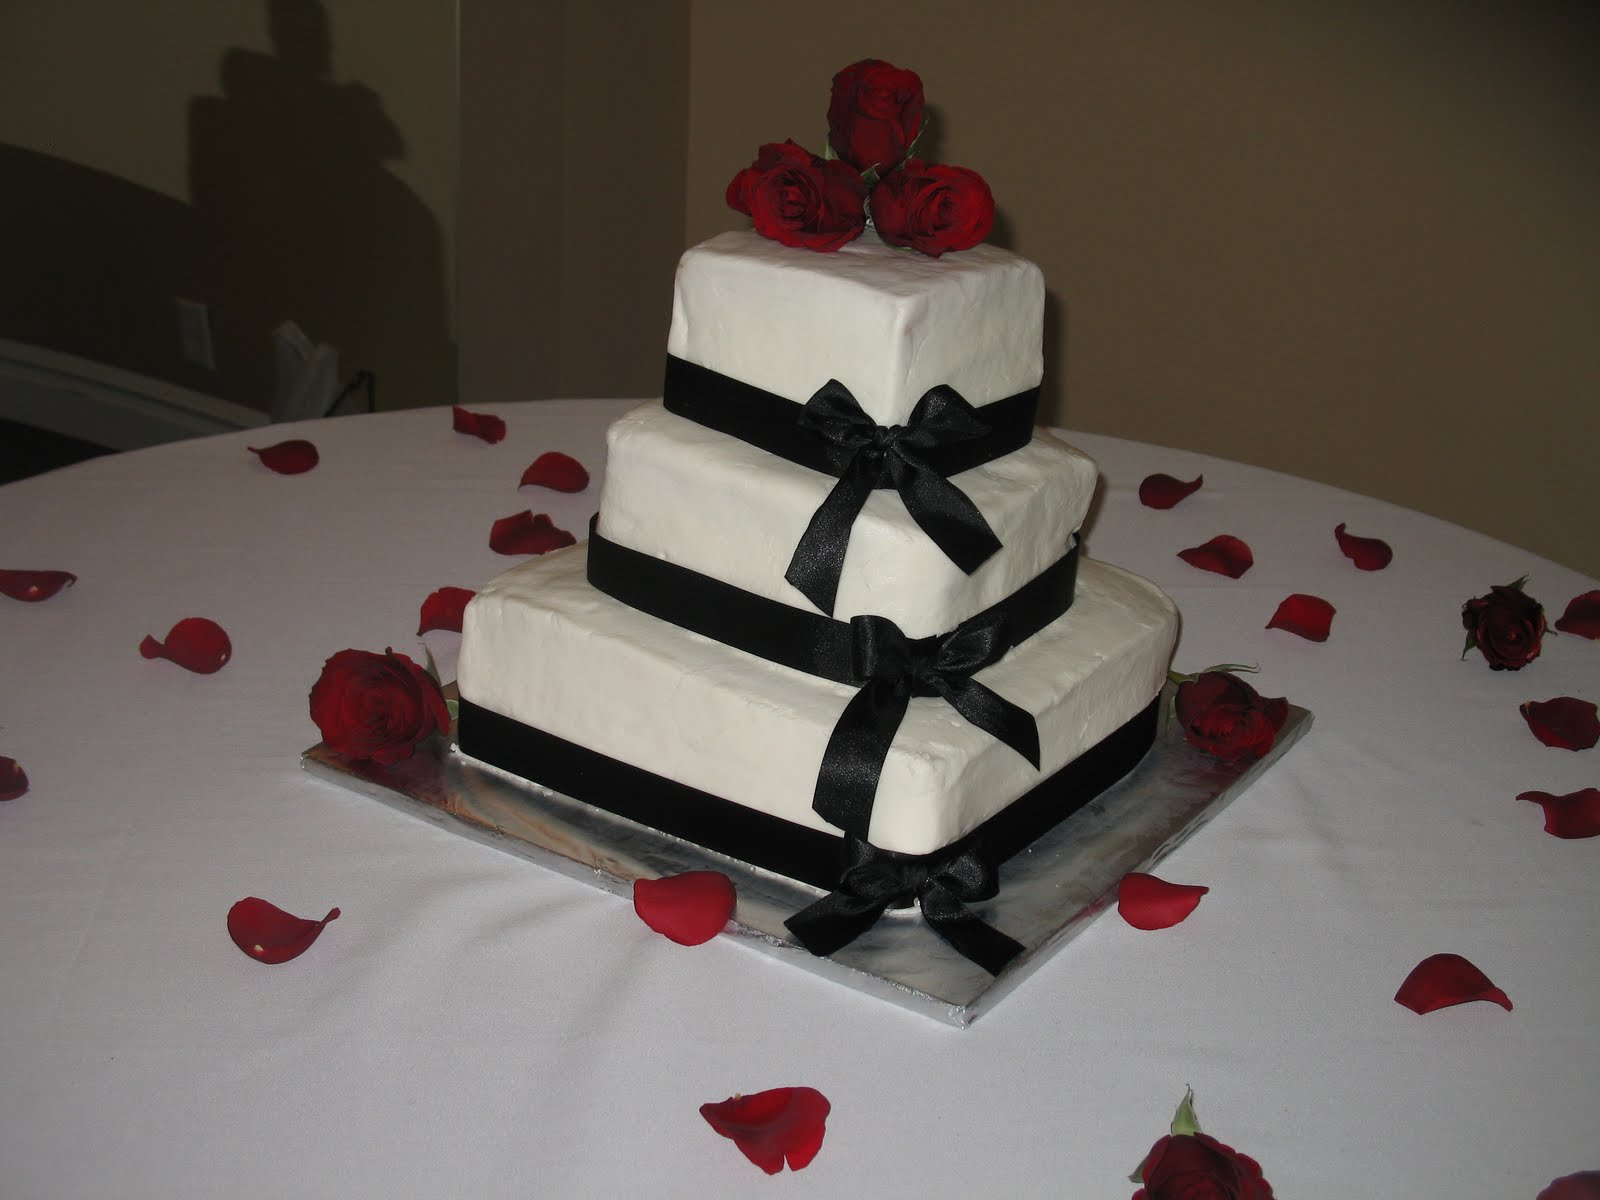 square wedding cake pictures Posted by Dede at 8:31 PM